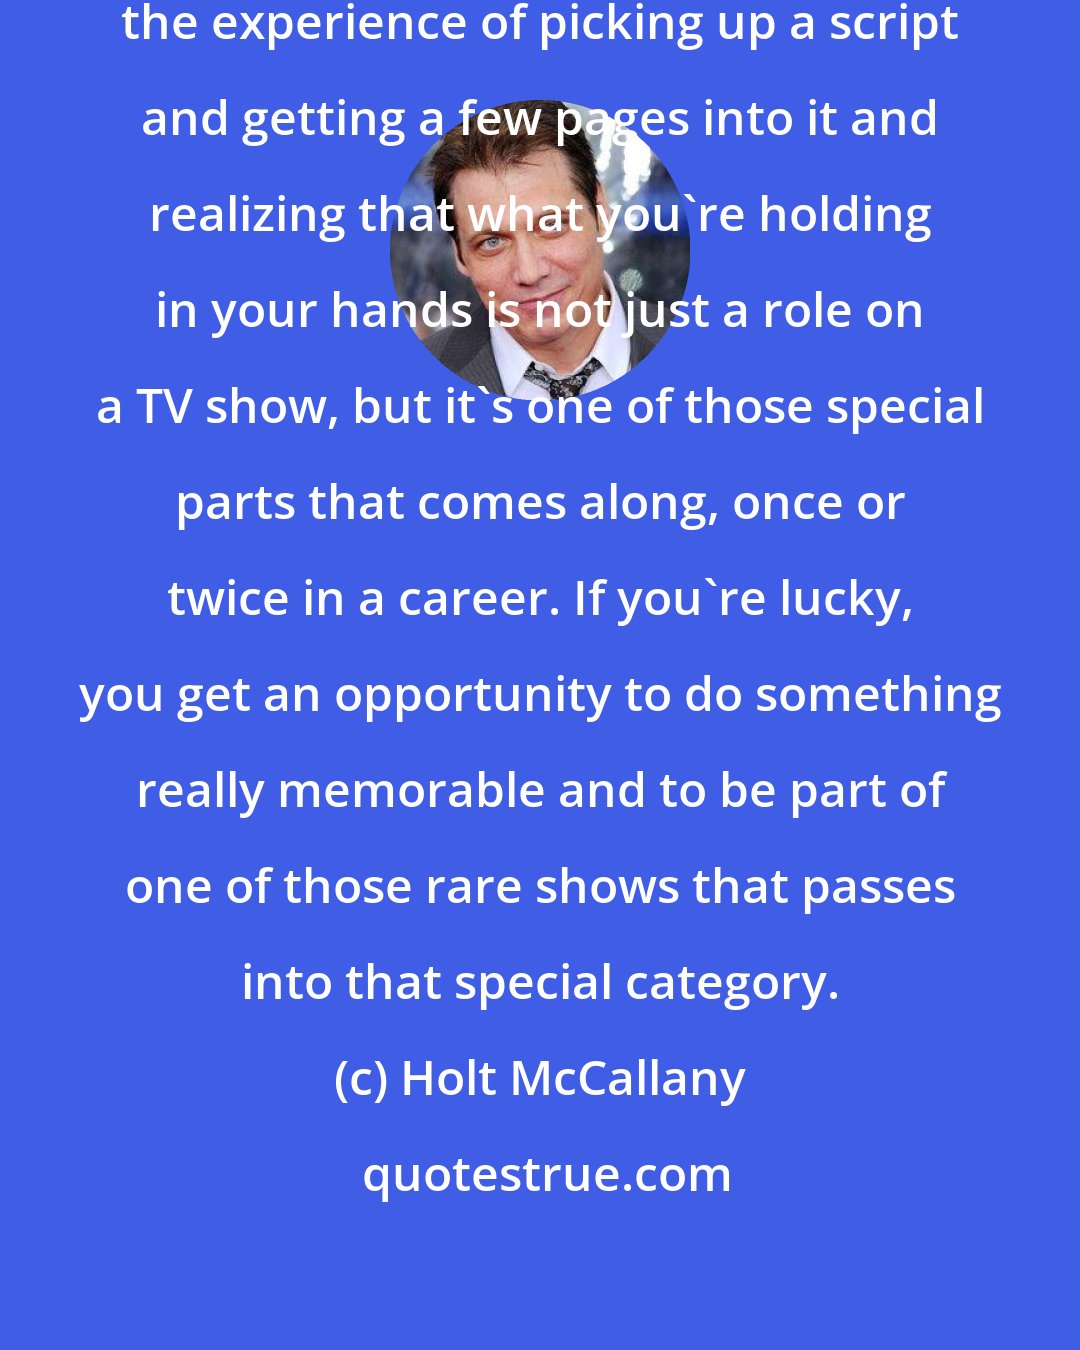 Holt McCallany: As an actor, you very rarely have the experience of picking up a script and getting a few pages into it and realizing that what you're holding in your hands is not just a role on a TV show, but it's one of those special parts that comes along, once or twice in a career. If you're lucky, you get an opportunity to do something really memorable and to be part of one of those rare shows that passes into that special category.